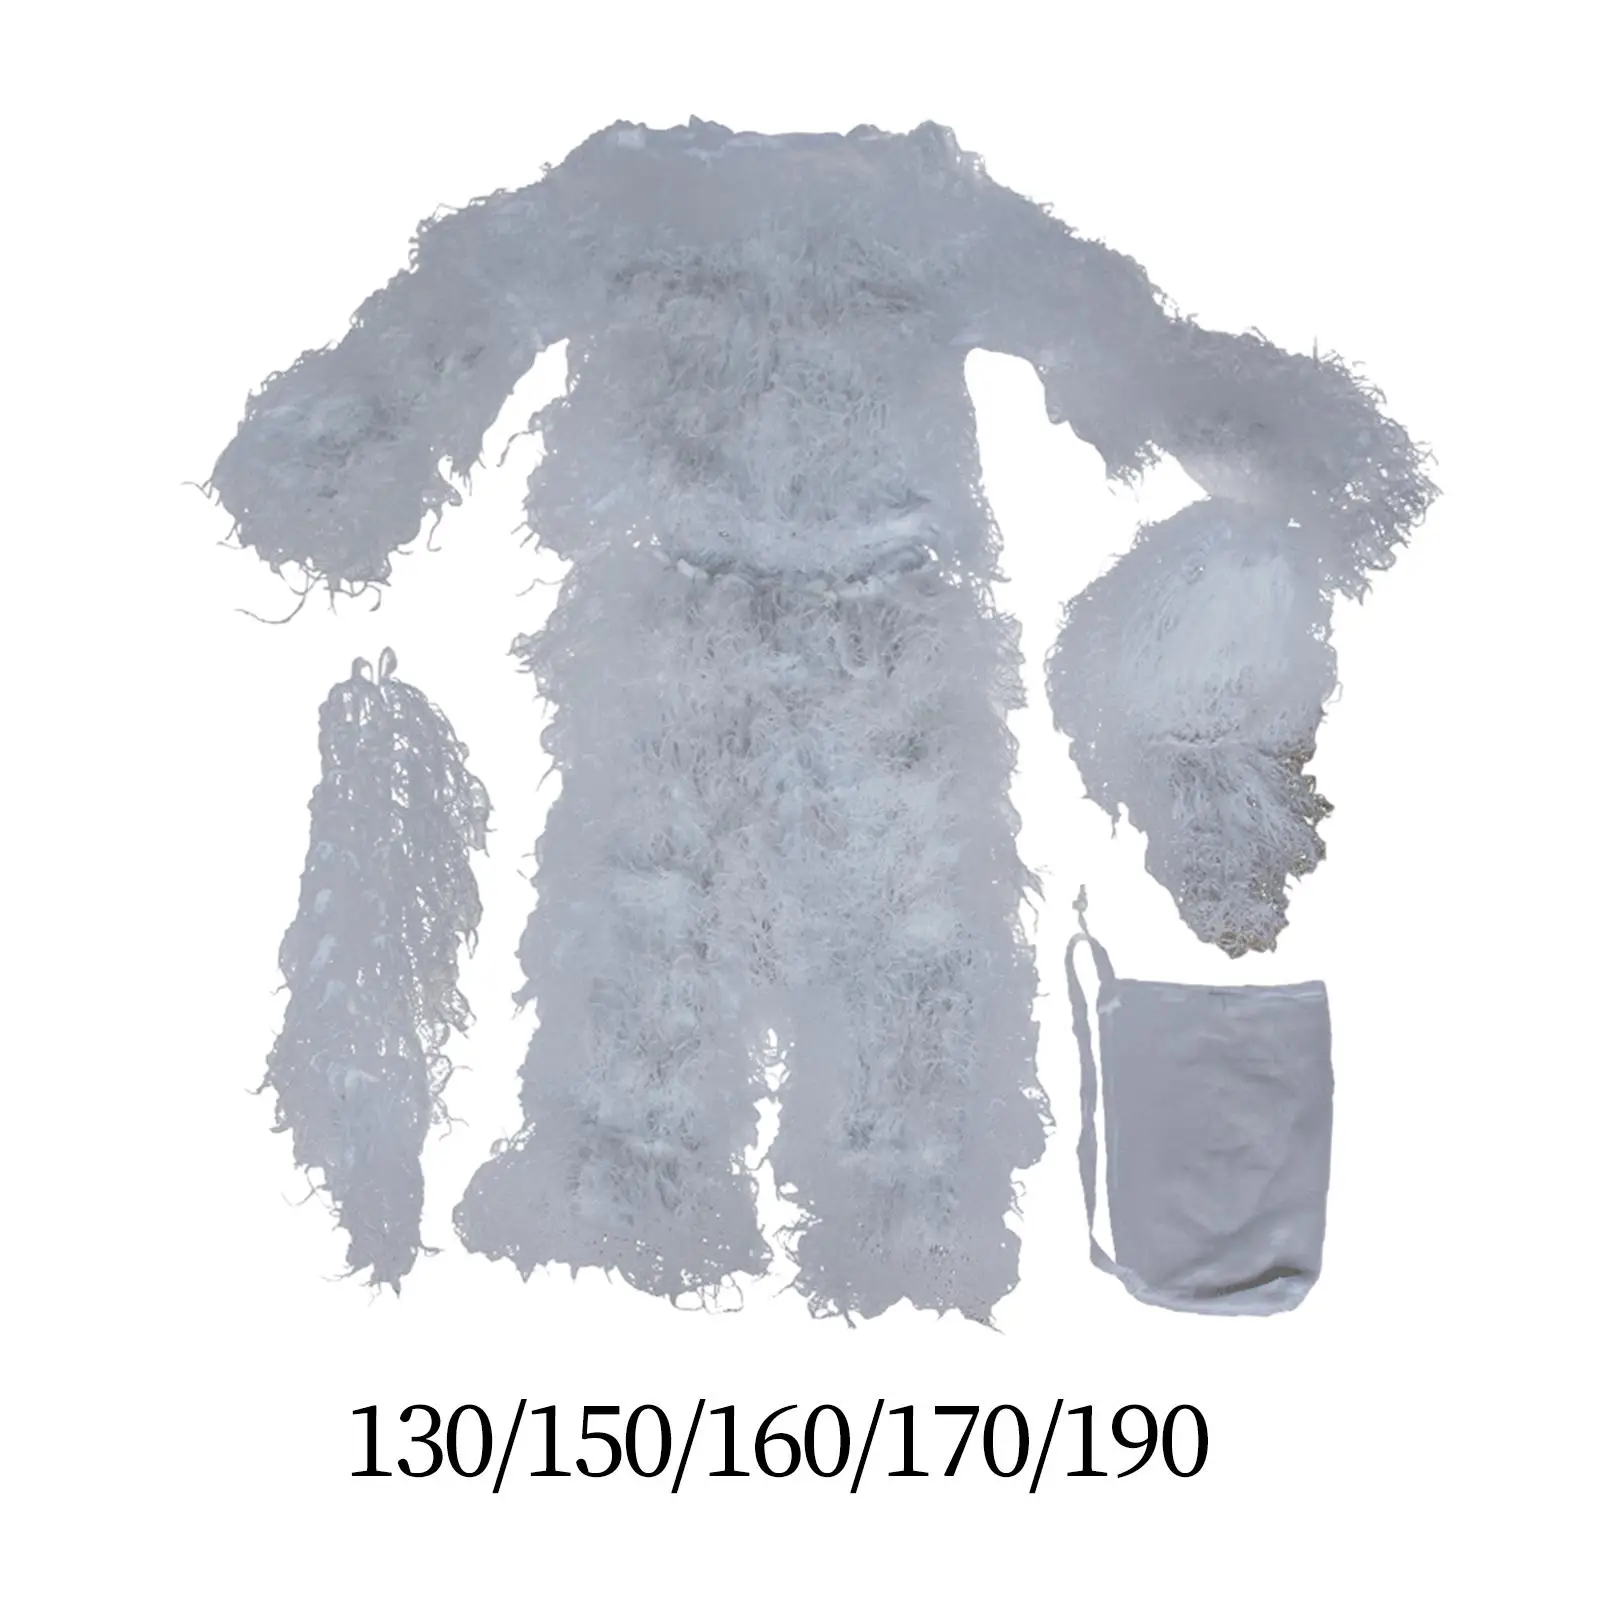 Ghillie Suit Hunting Suit Jacket and Pants Apparel Clothes for Bird Watching Costume Photography Hunting in Winter